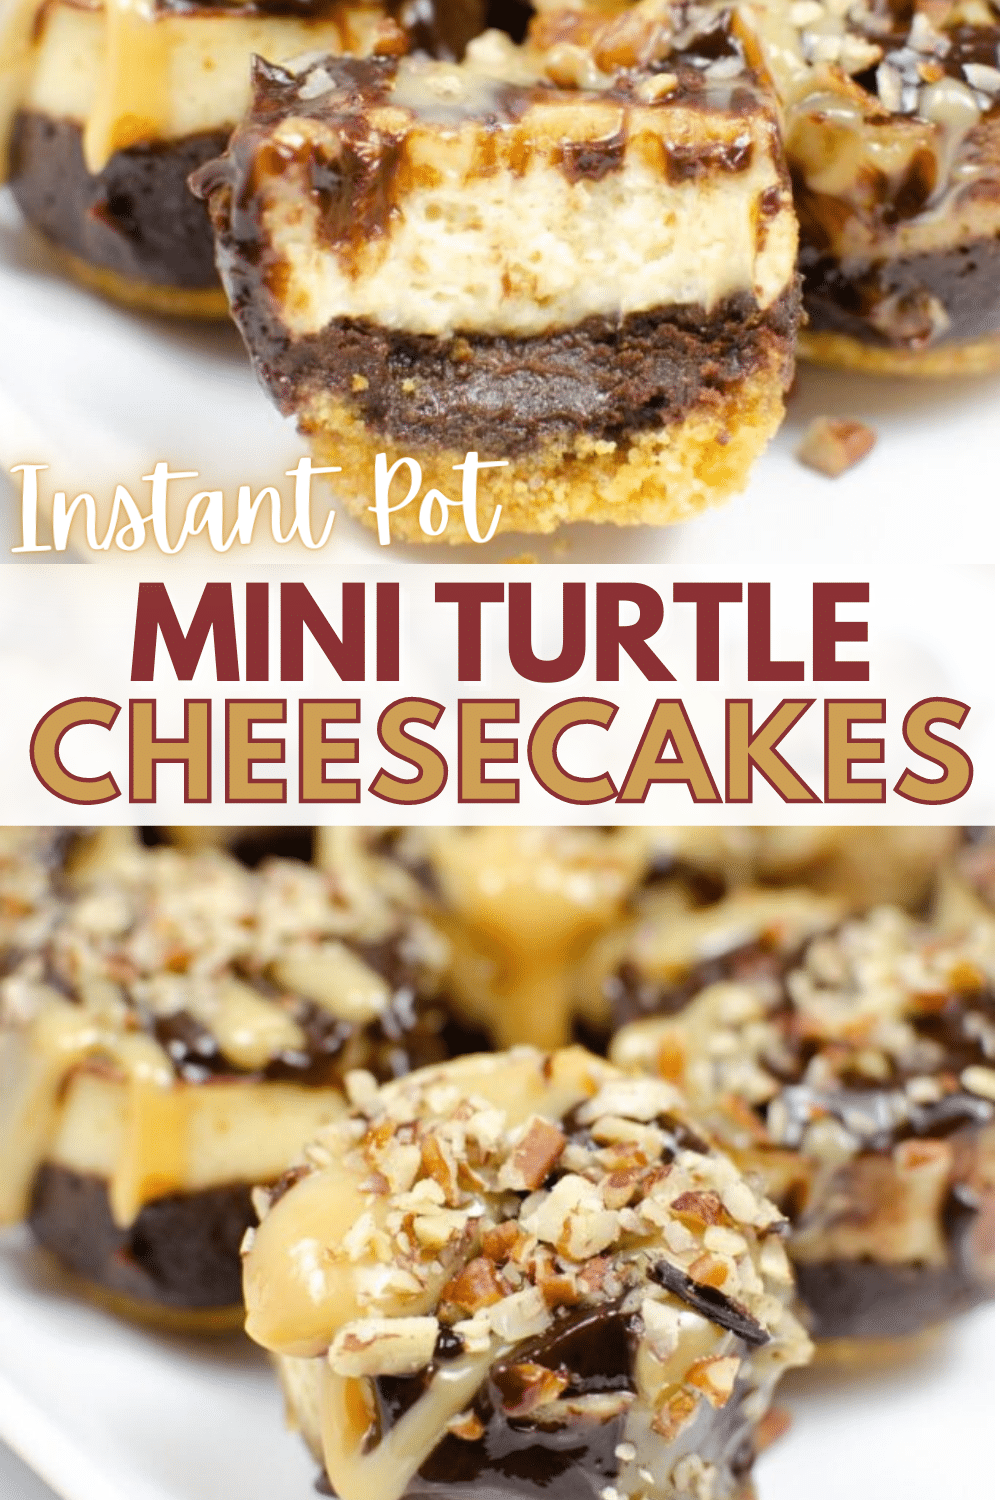 These mini turtle cheesecakes are an absolute treat! Made in an instant pot they're a heaven of creamy cheesecake topped with lush caramel, rich chocolate ganache, and crushed pecans. #instantpot #pressurecooker #cheesecake #turtlecheesecake via @wondermomwannab